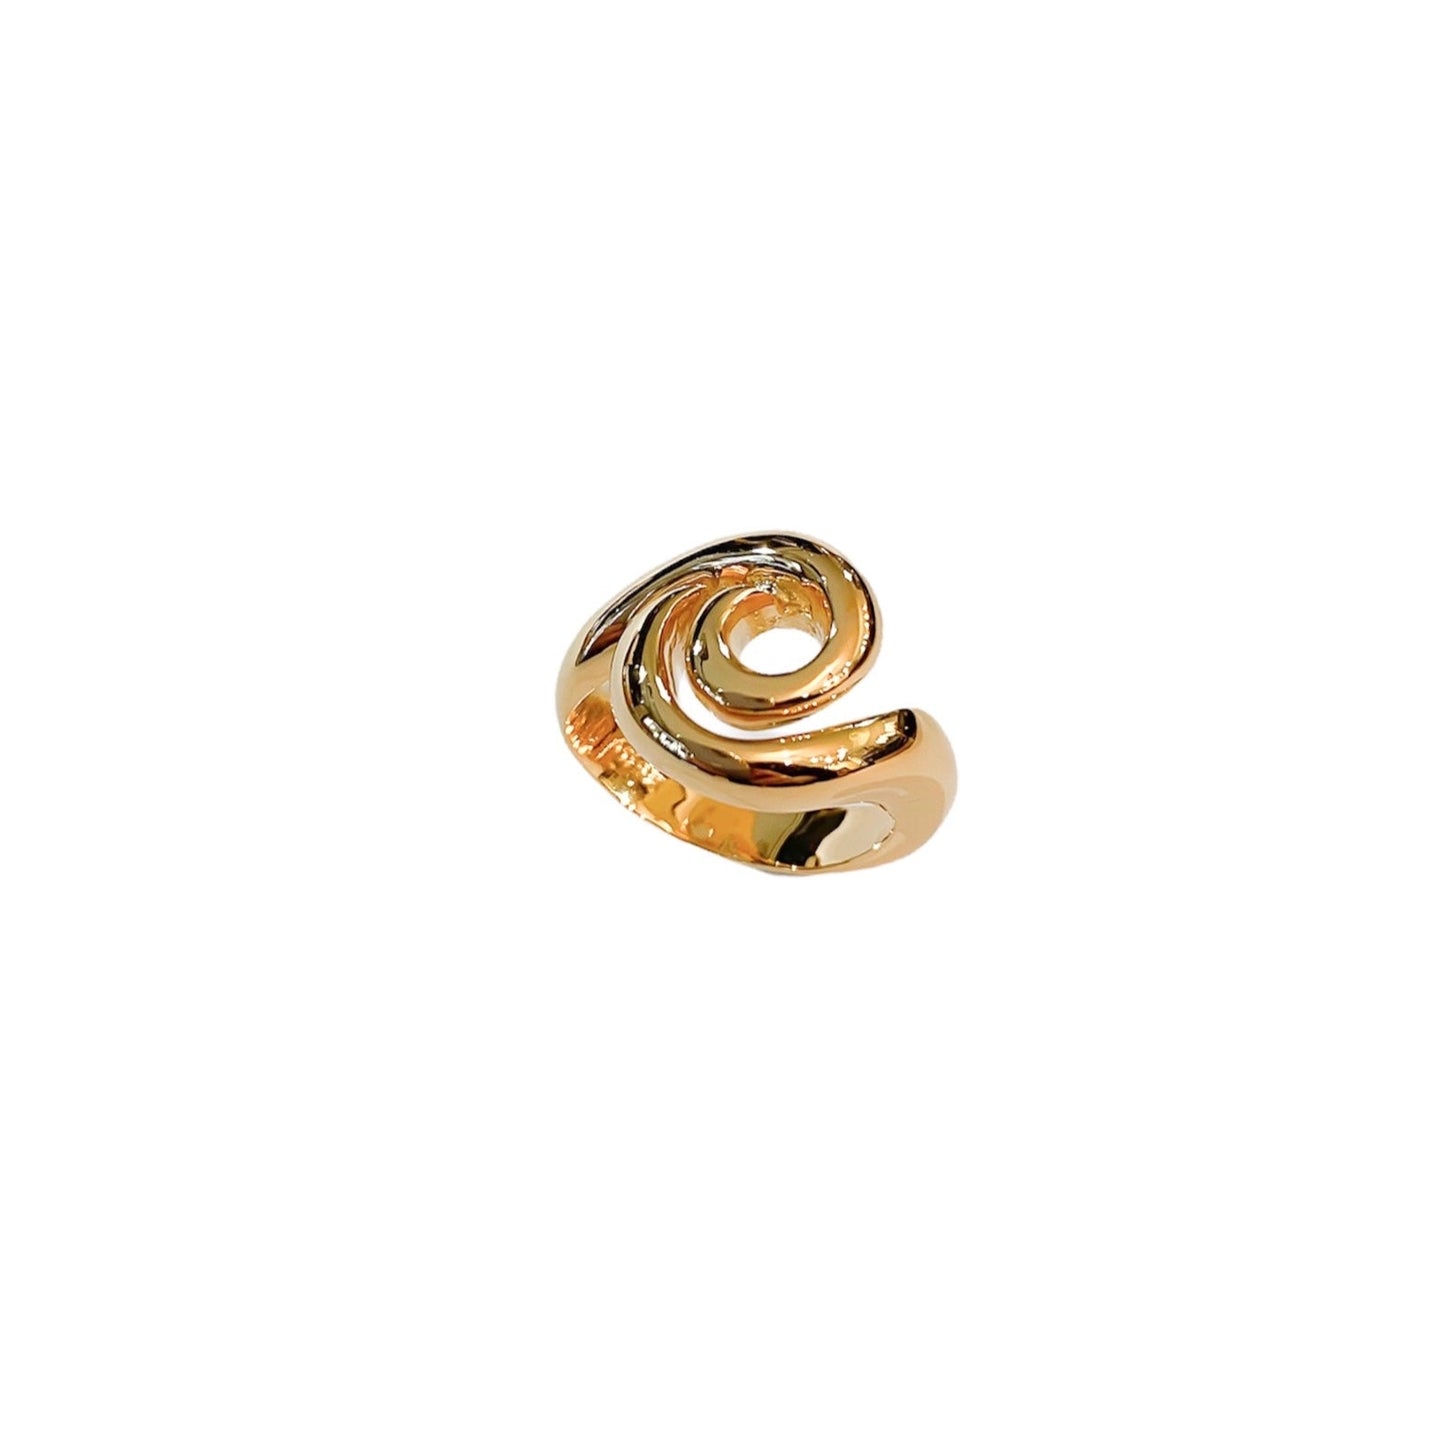 Surrea Blank gold plated silver ring, top view.